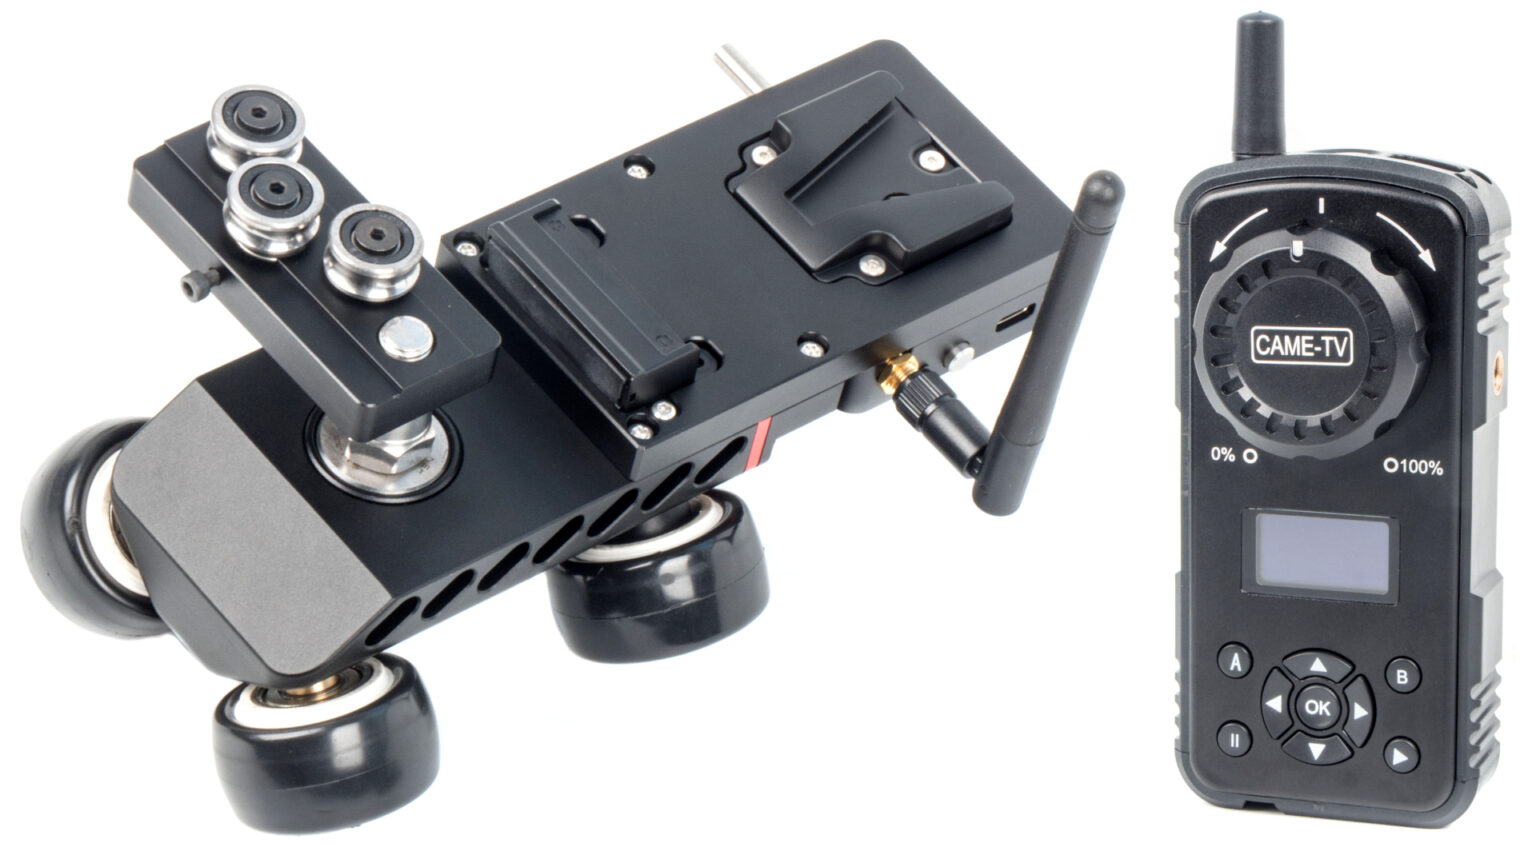 CAME-TV Motorized Track Dolly